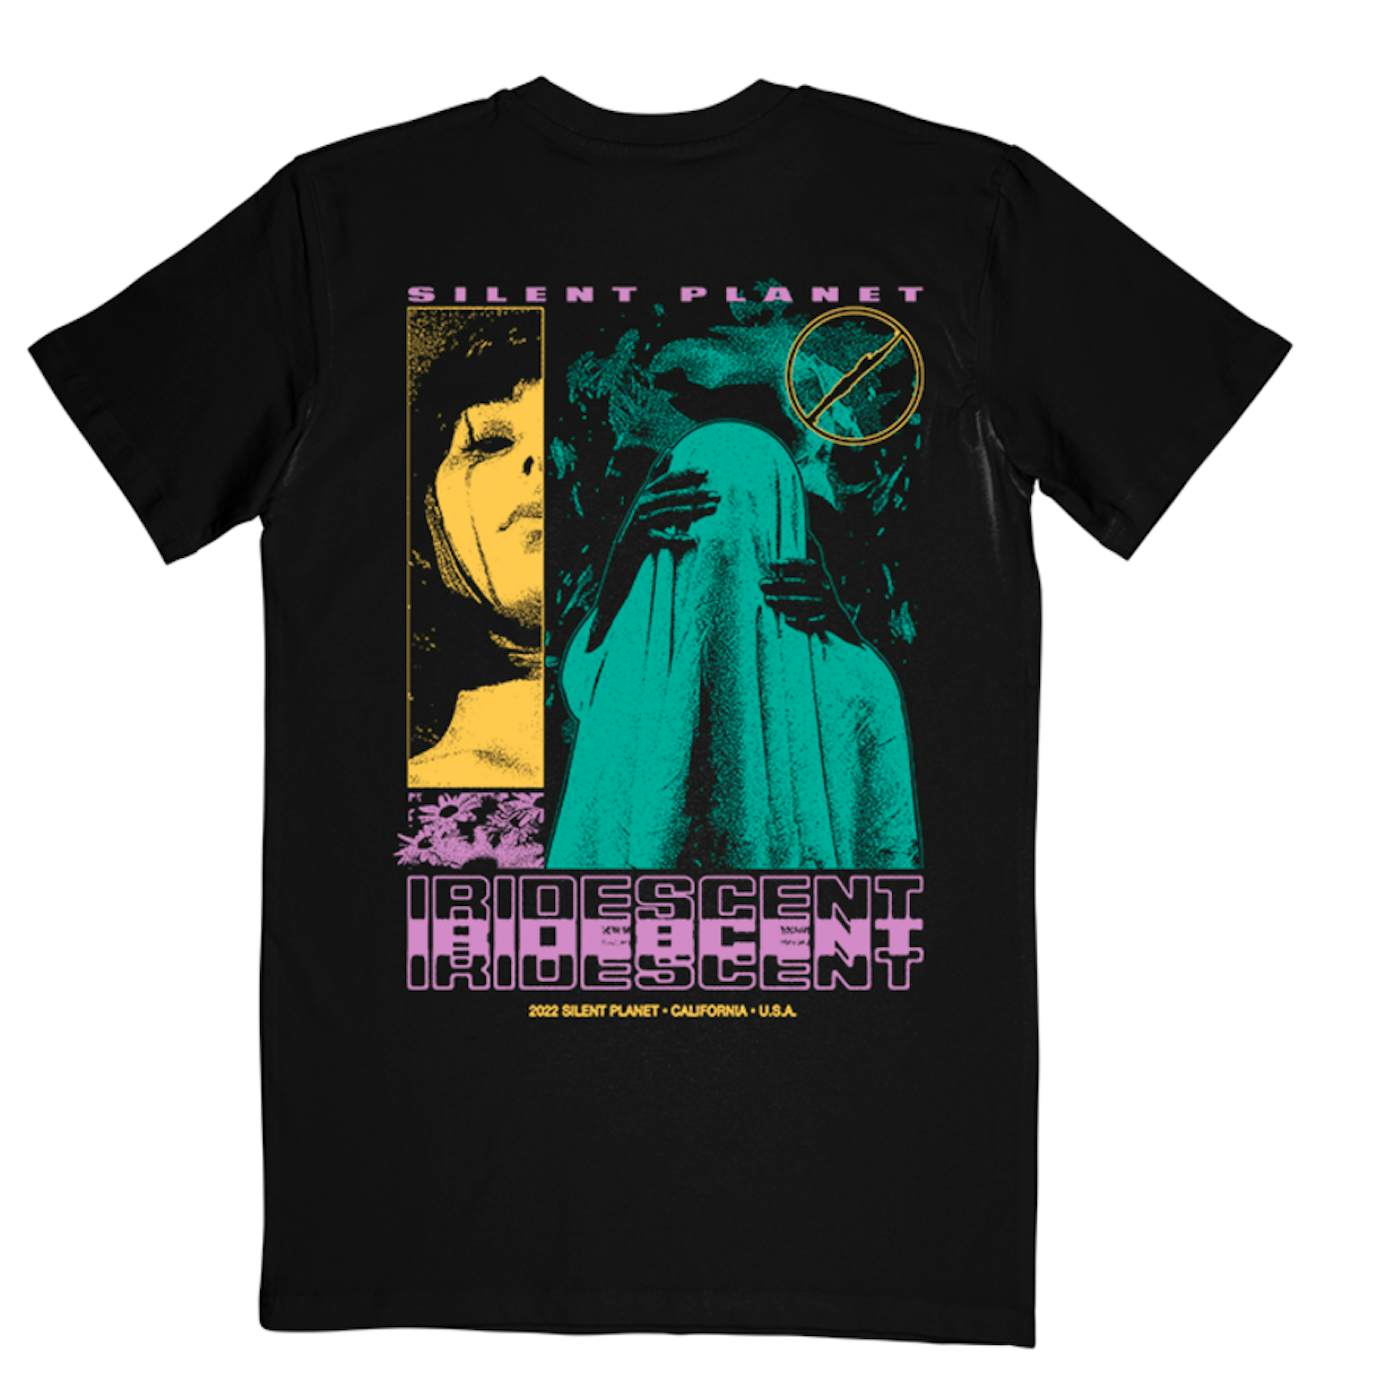 Silent Planet "Ghost Gussy" T-Shirt